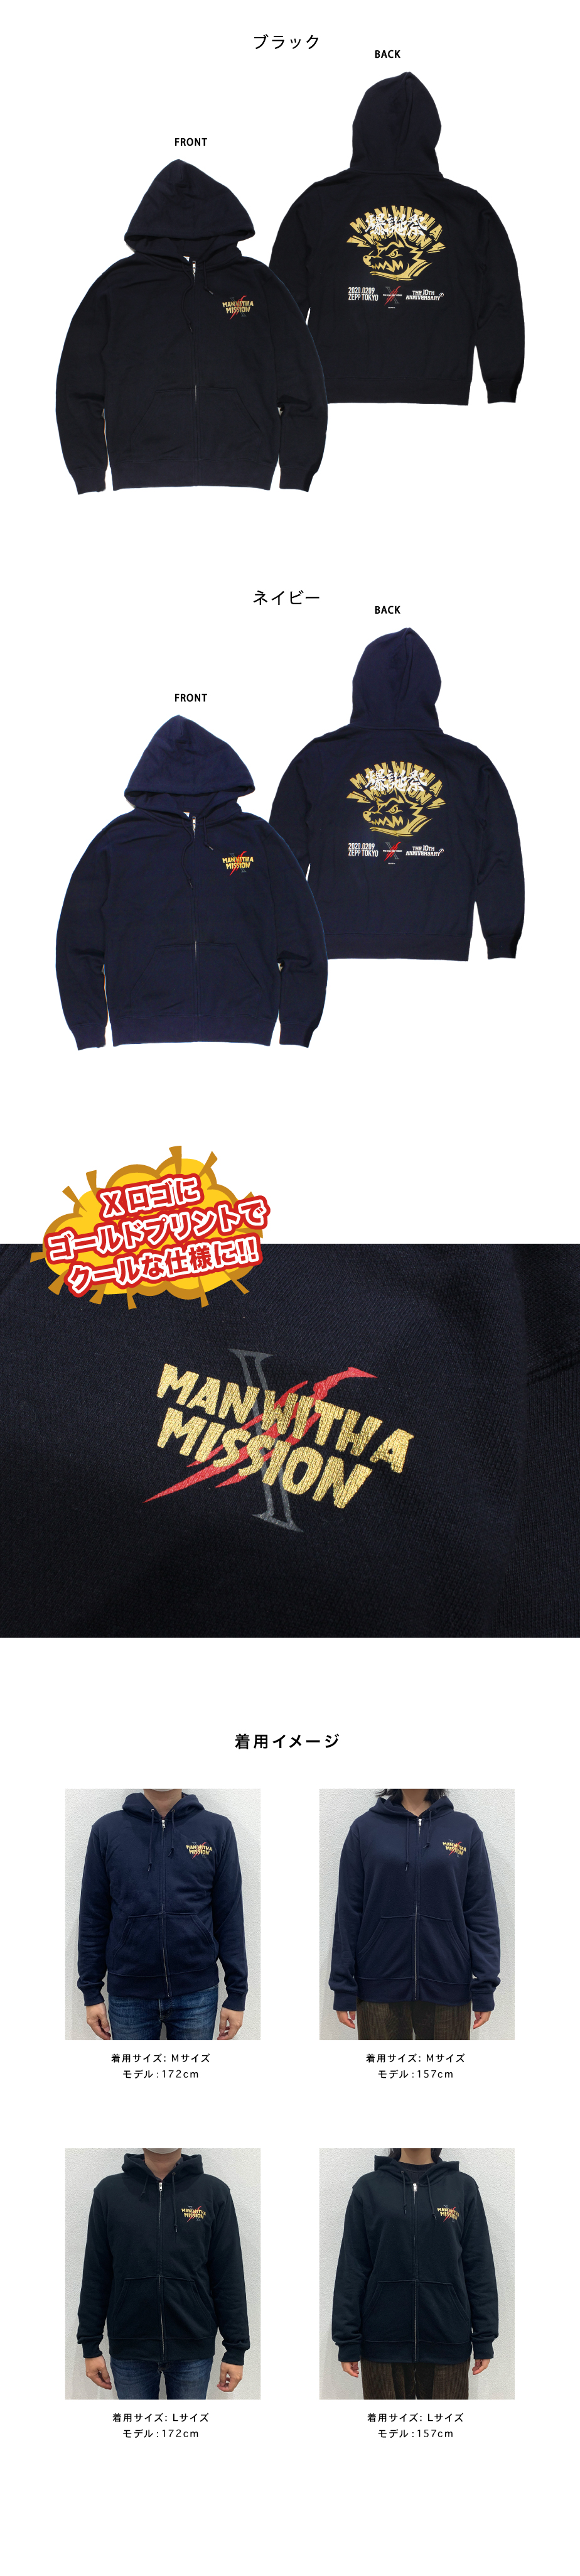 MAN WITH A MISSION 爆誕祭限定タオル　ブラック